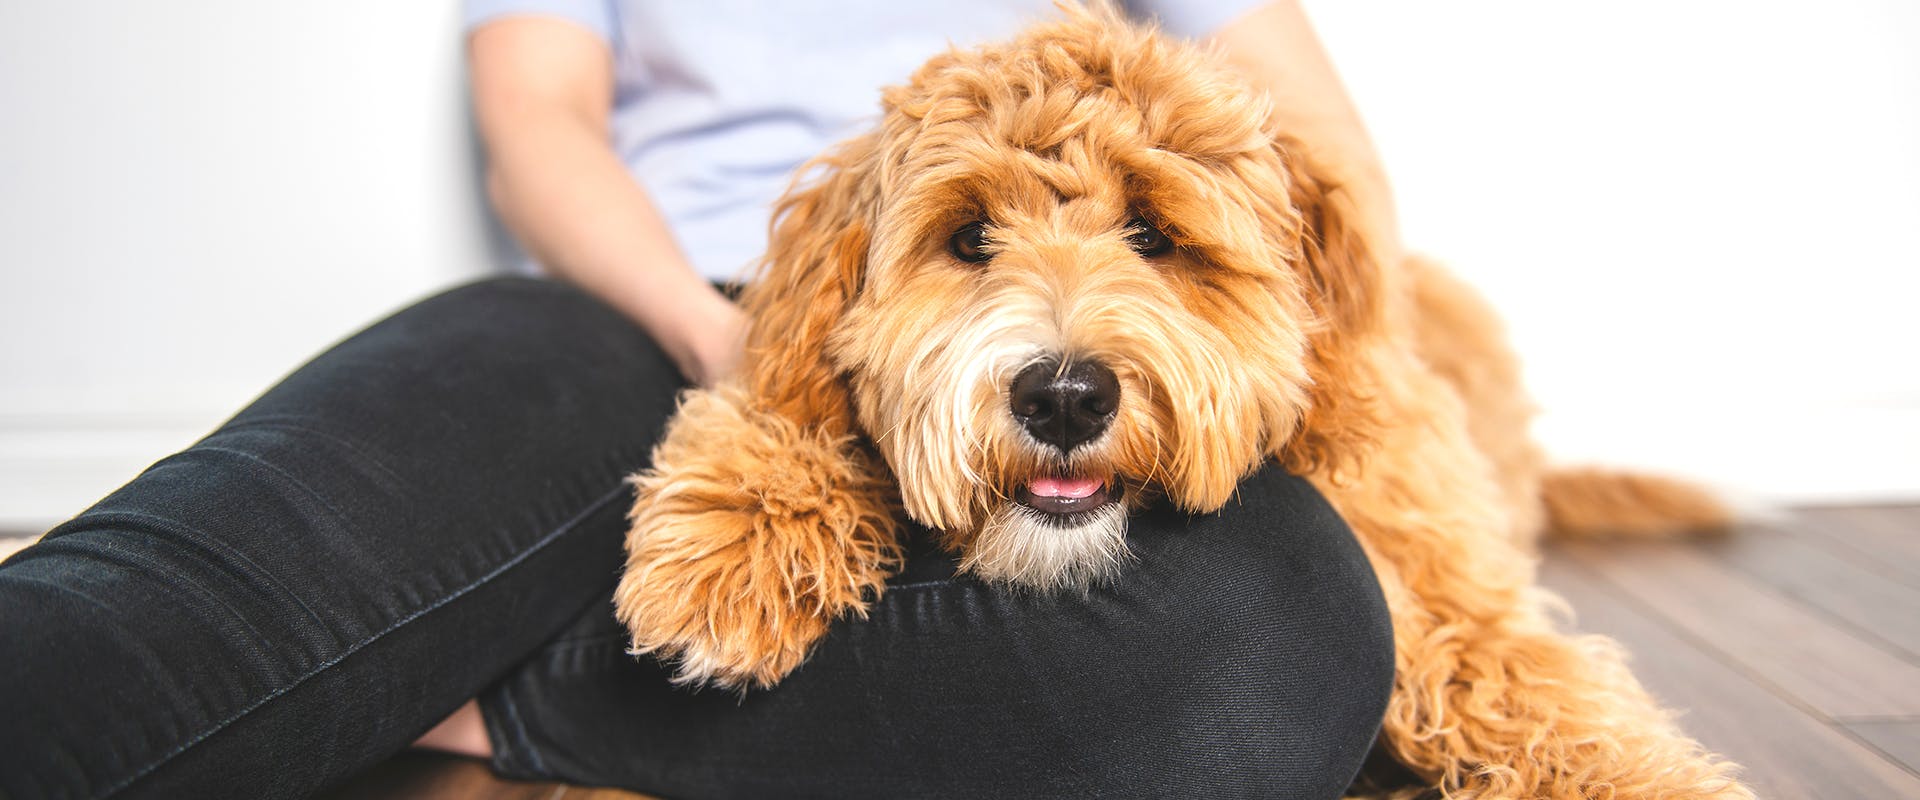 A Goldendoodle dog sitting on a person's lap